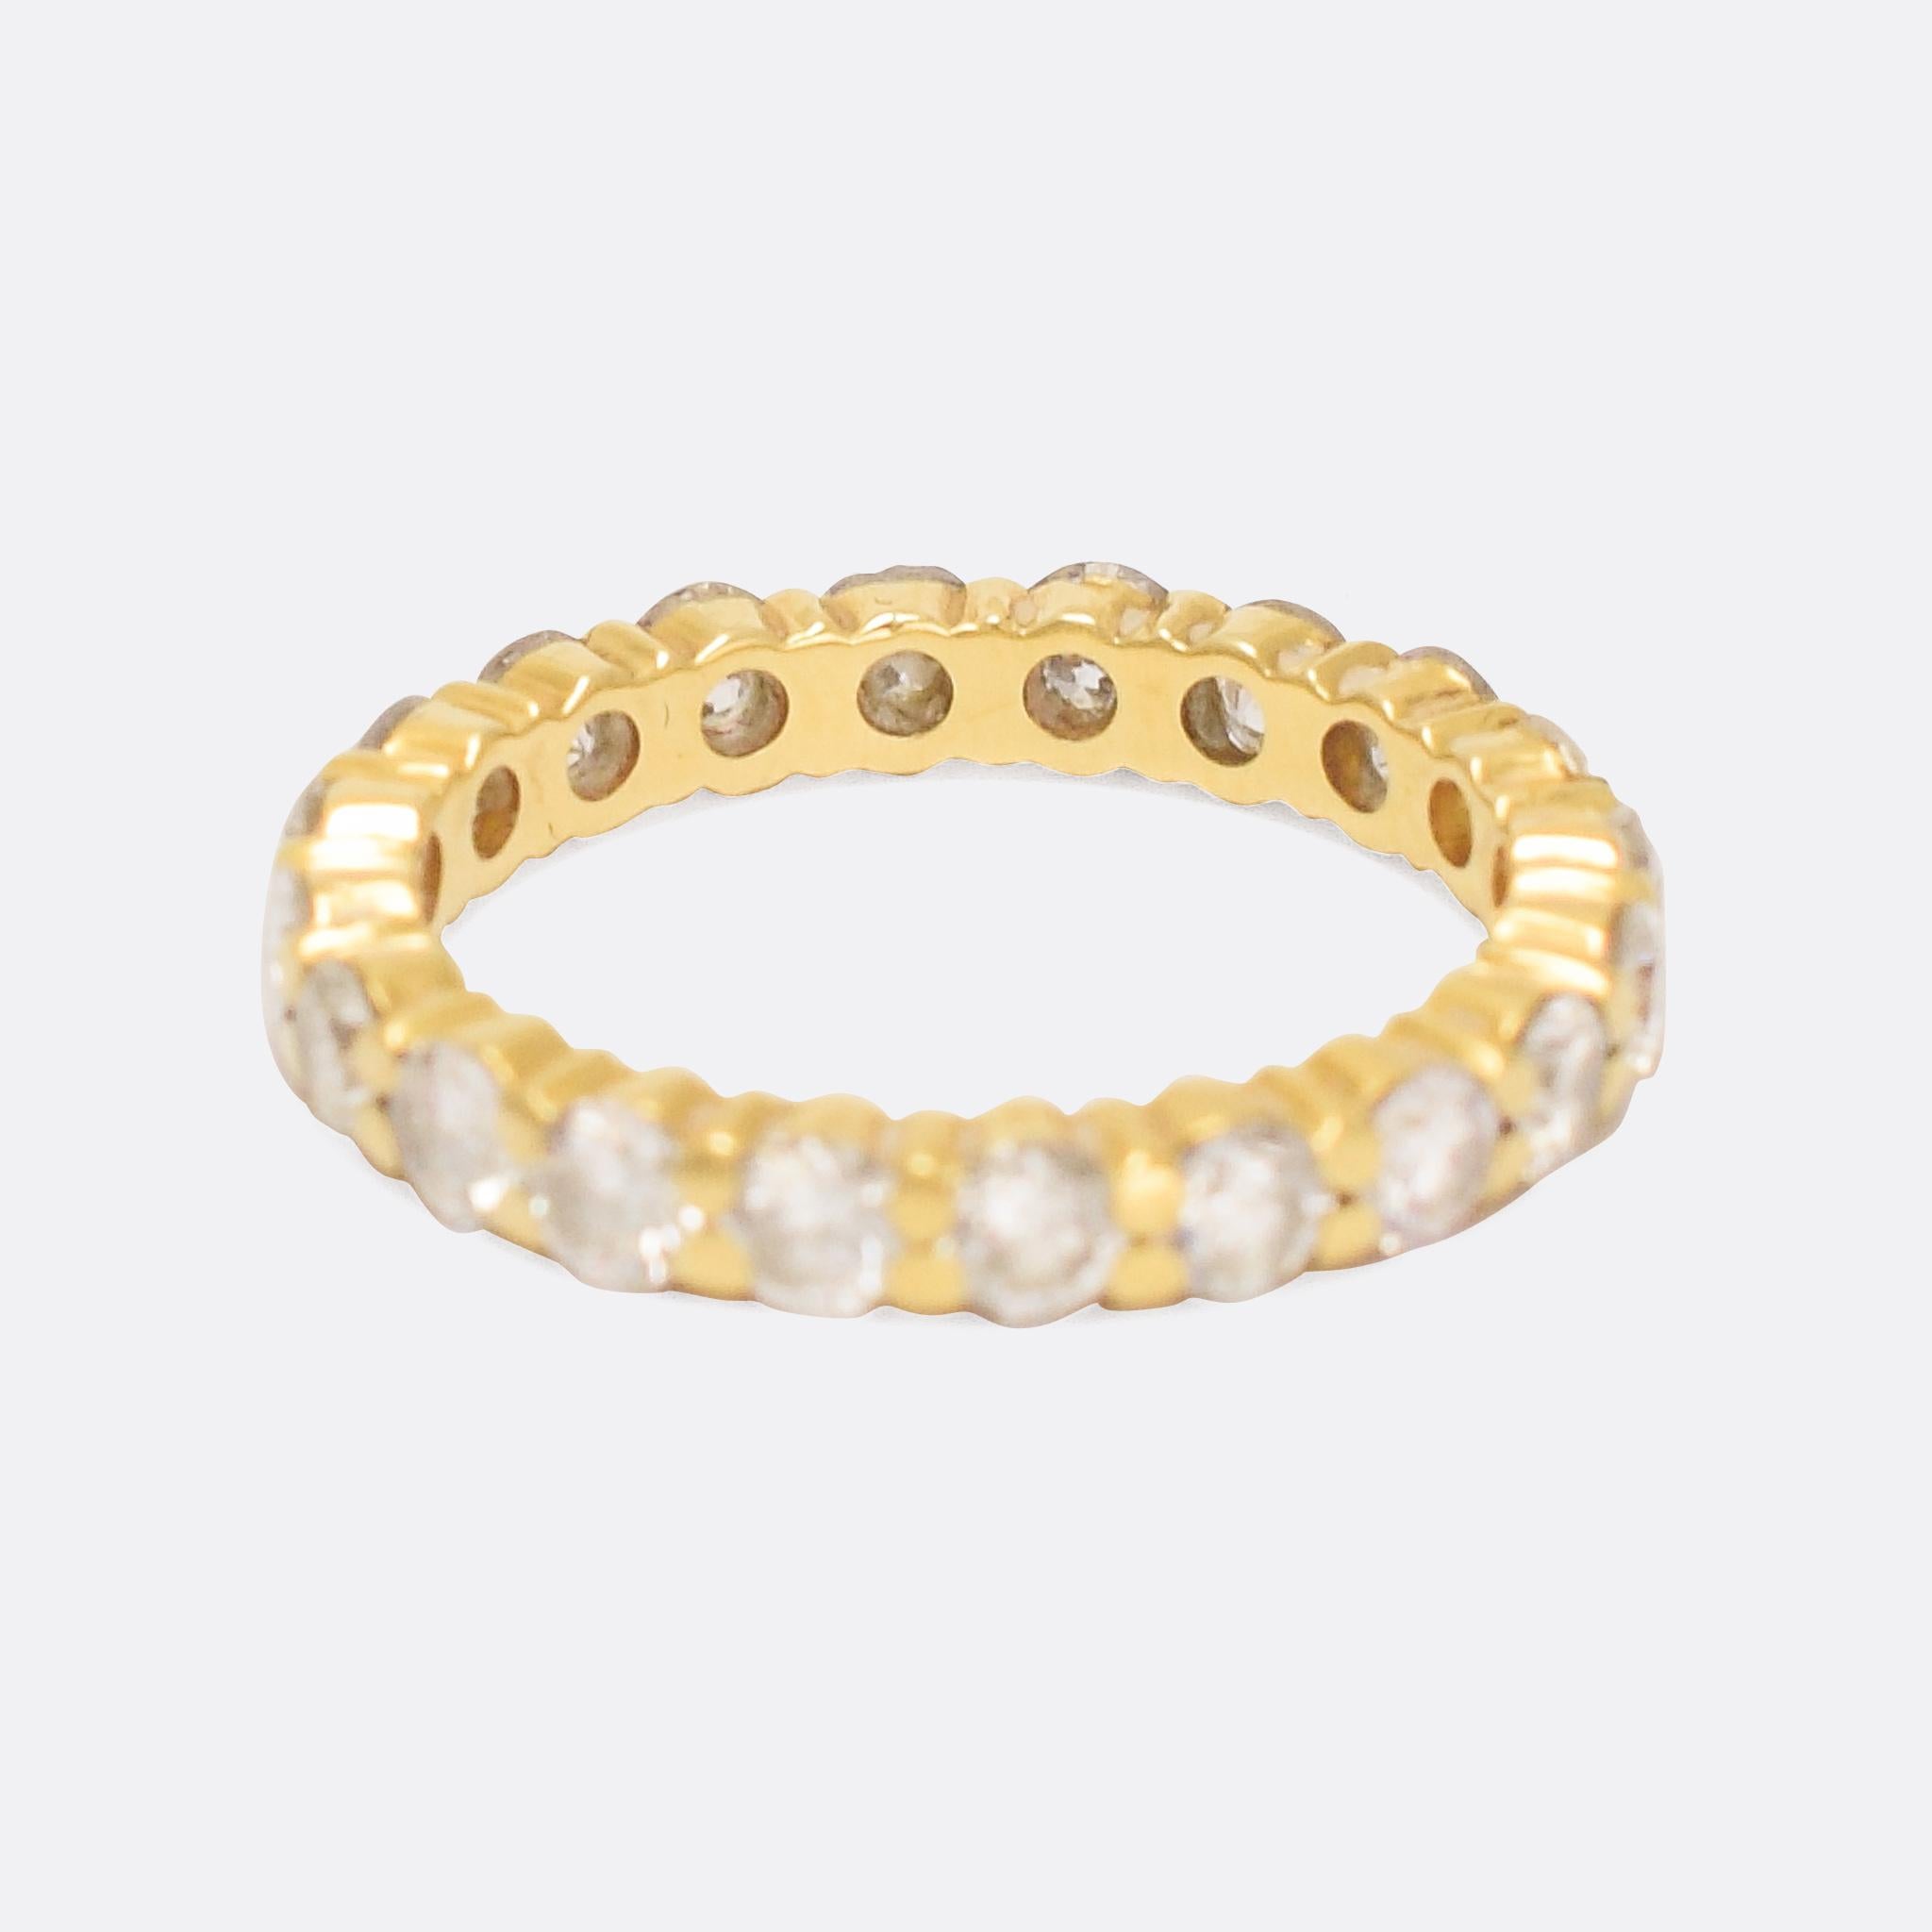 Superb contemporary eternity ring set with over 2 carats of bright brilliant cut diamonds. The stones rest in tension settings, and the ring is constructed in 18k yellow gold throughout. It's a good size (5.5 US), particularly well made, and looks